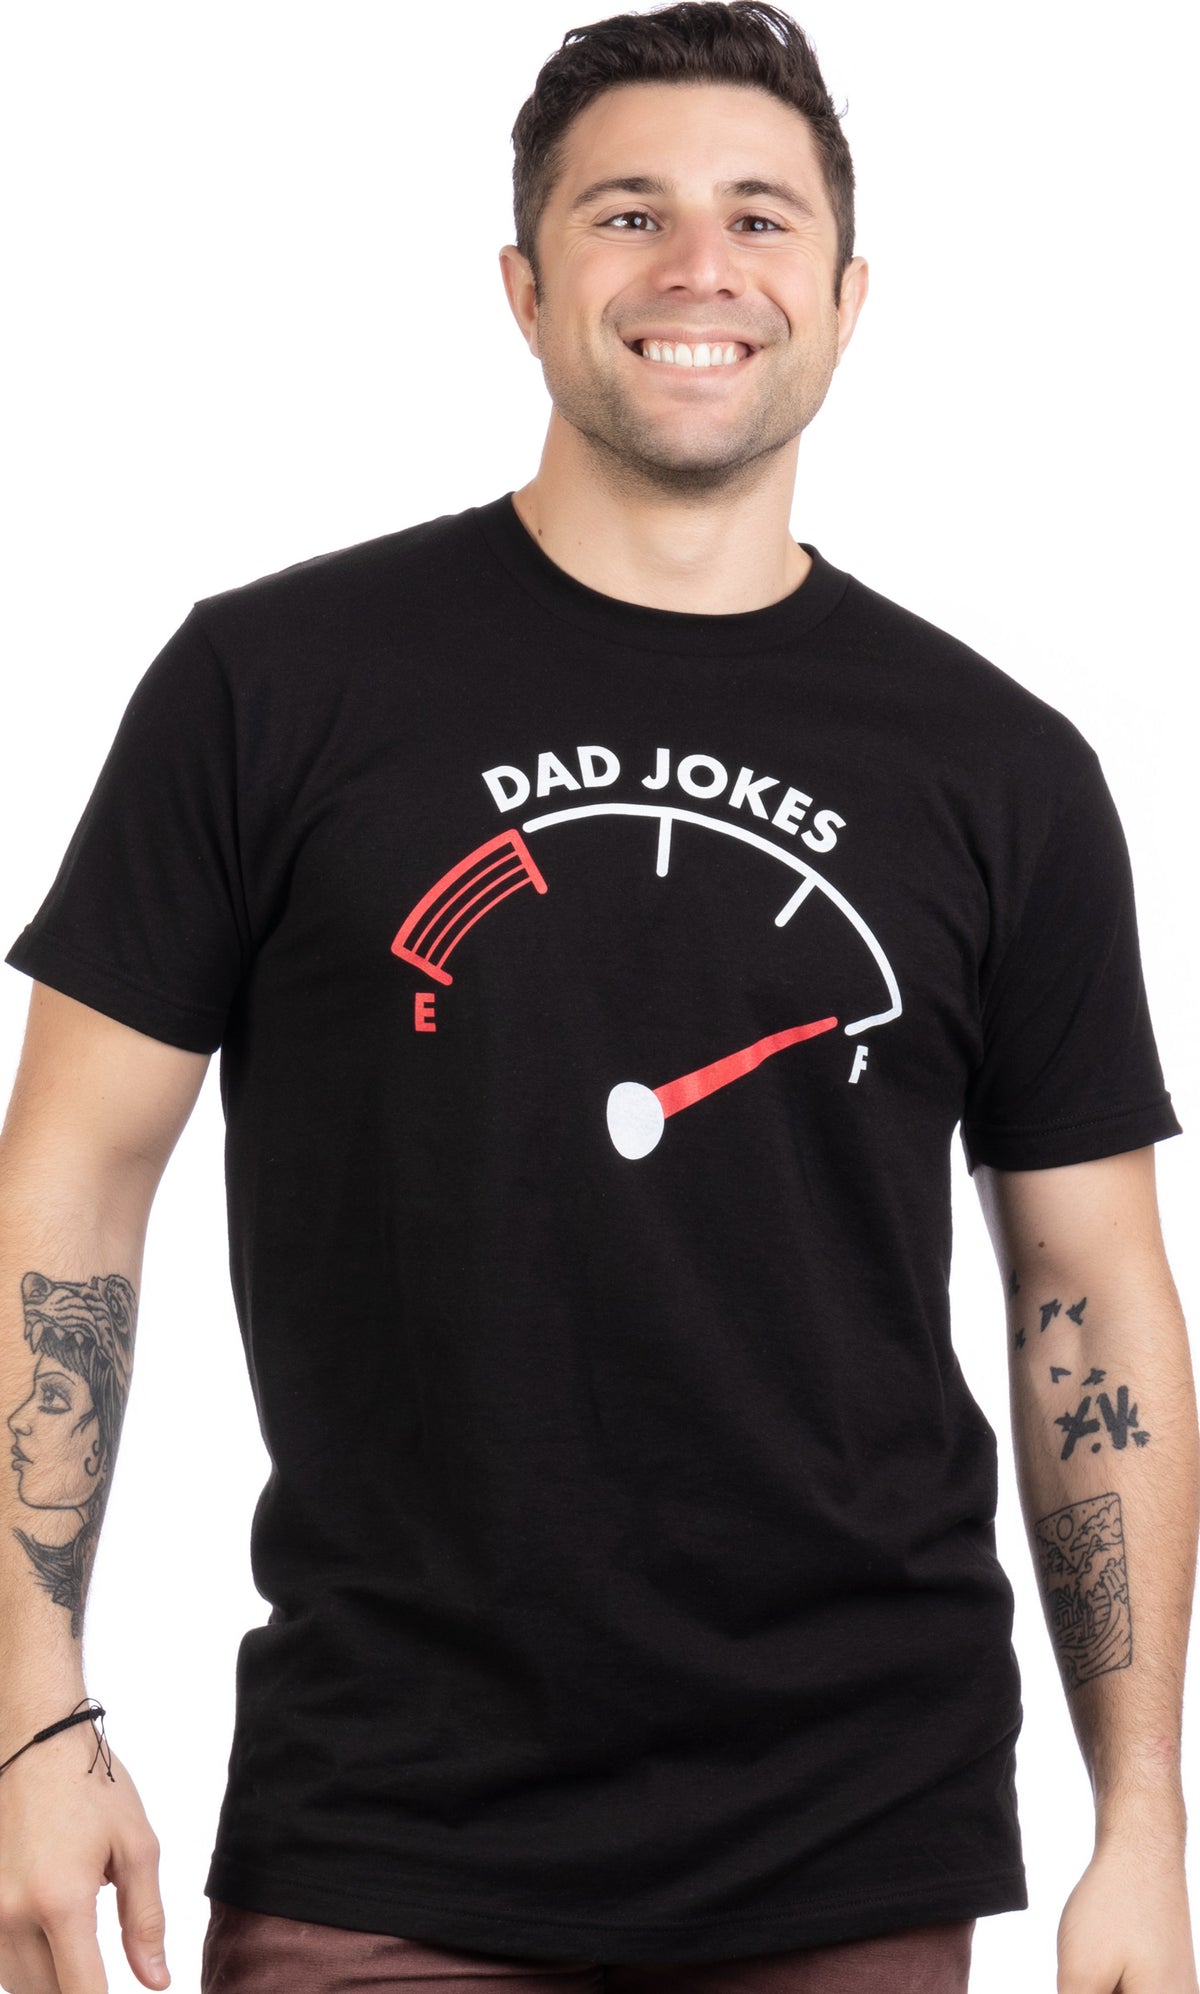 Dad Jokes Tank is Full Funny Father Husband Family Humor Silly Men T-shirt